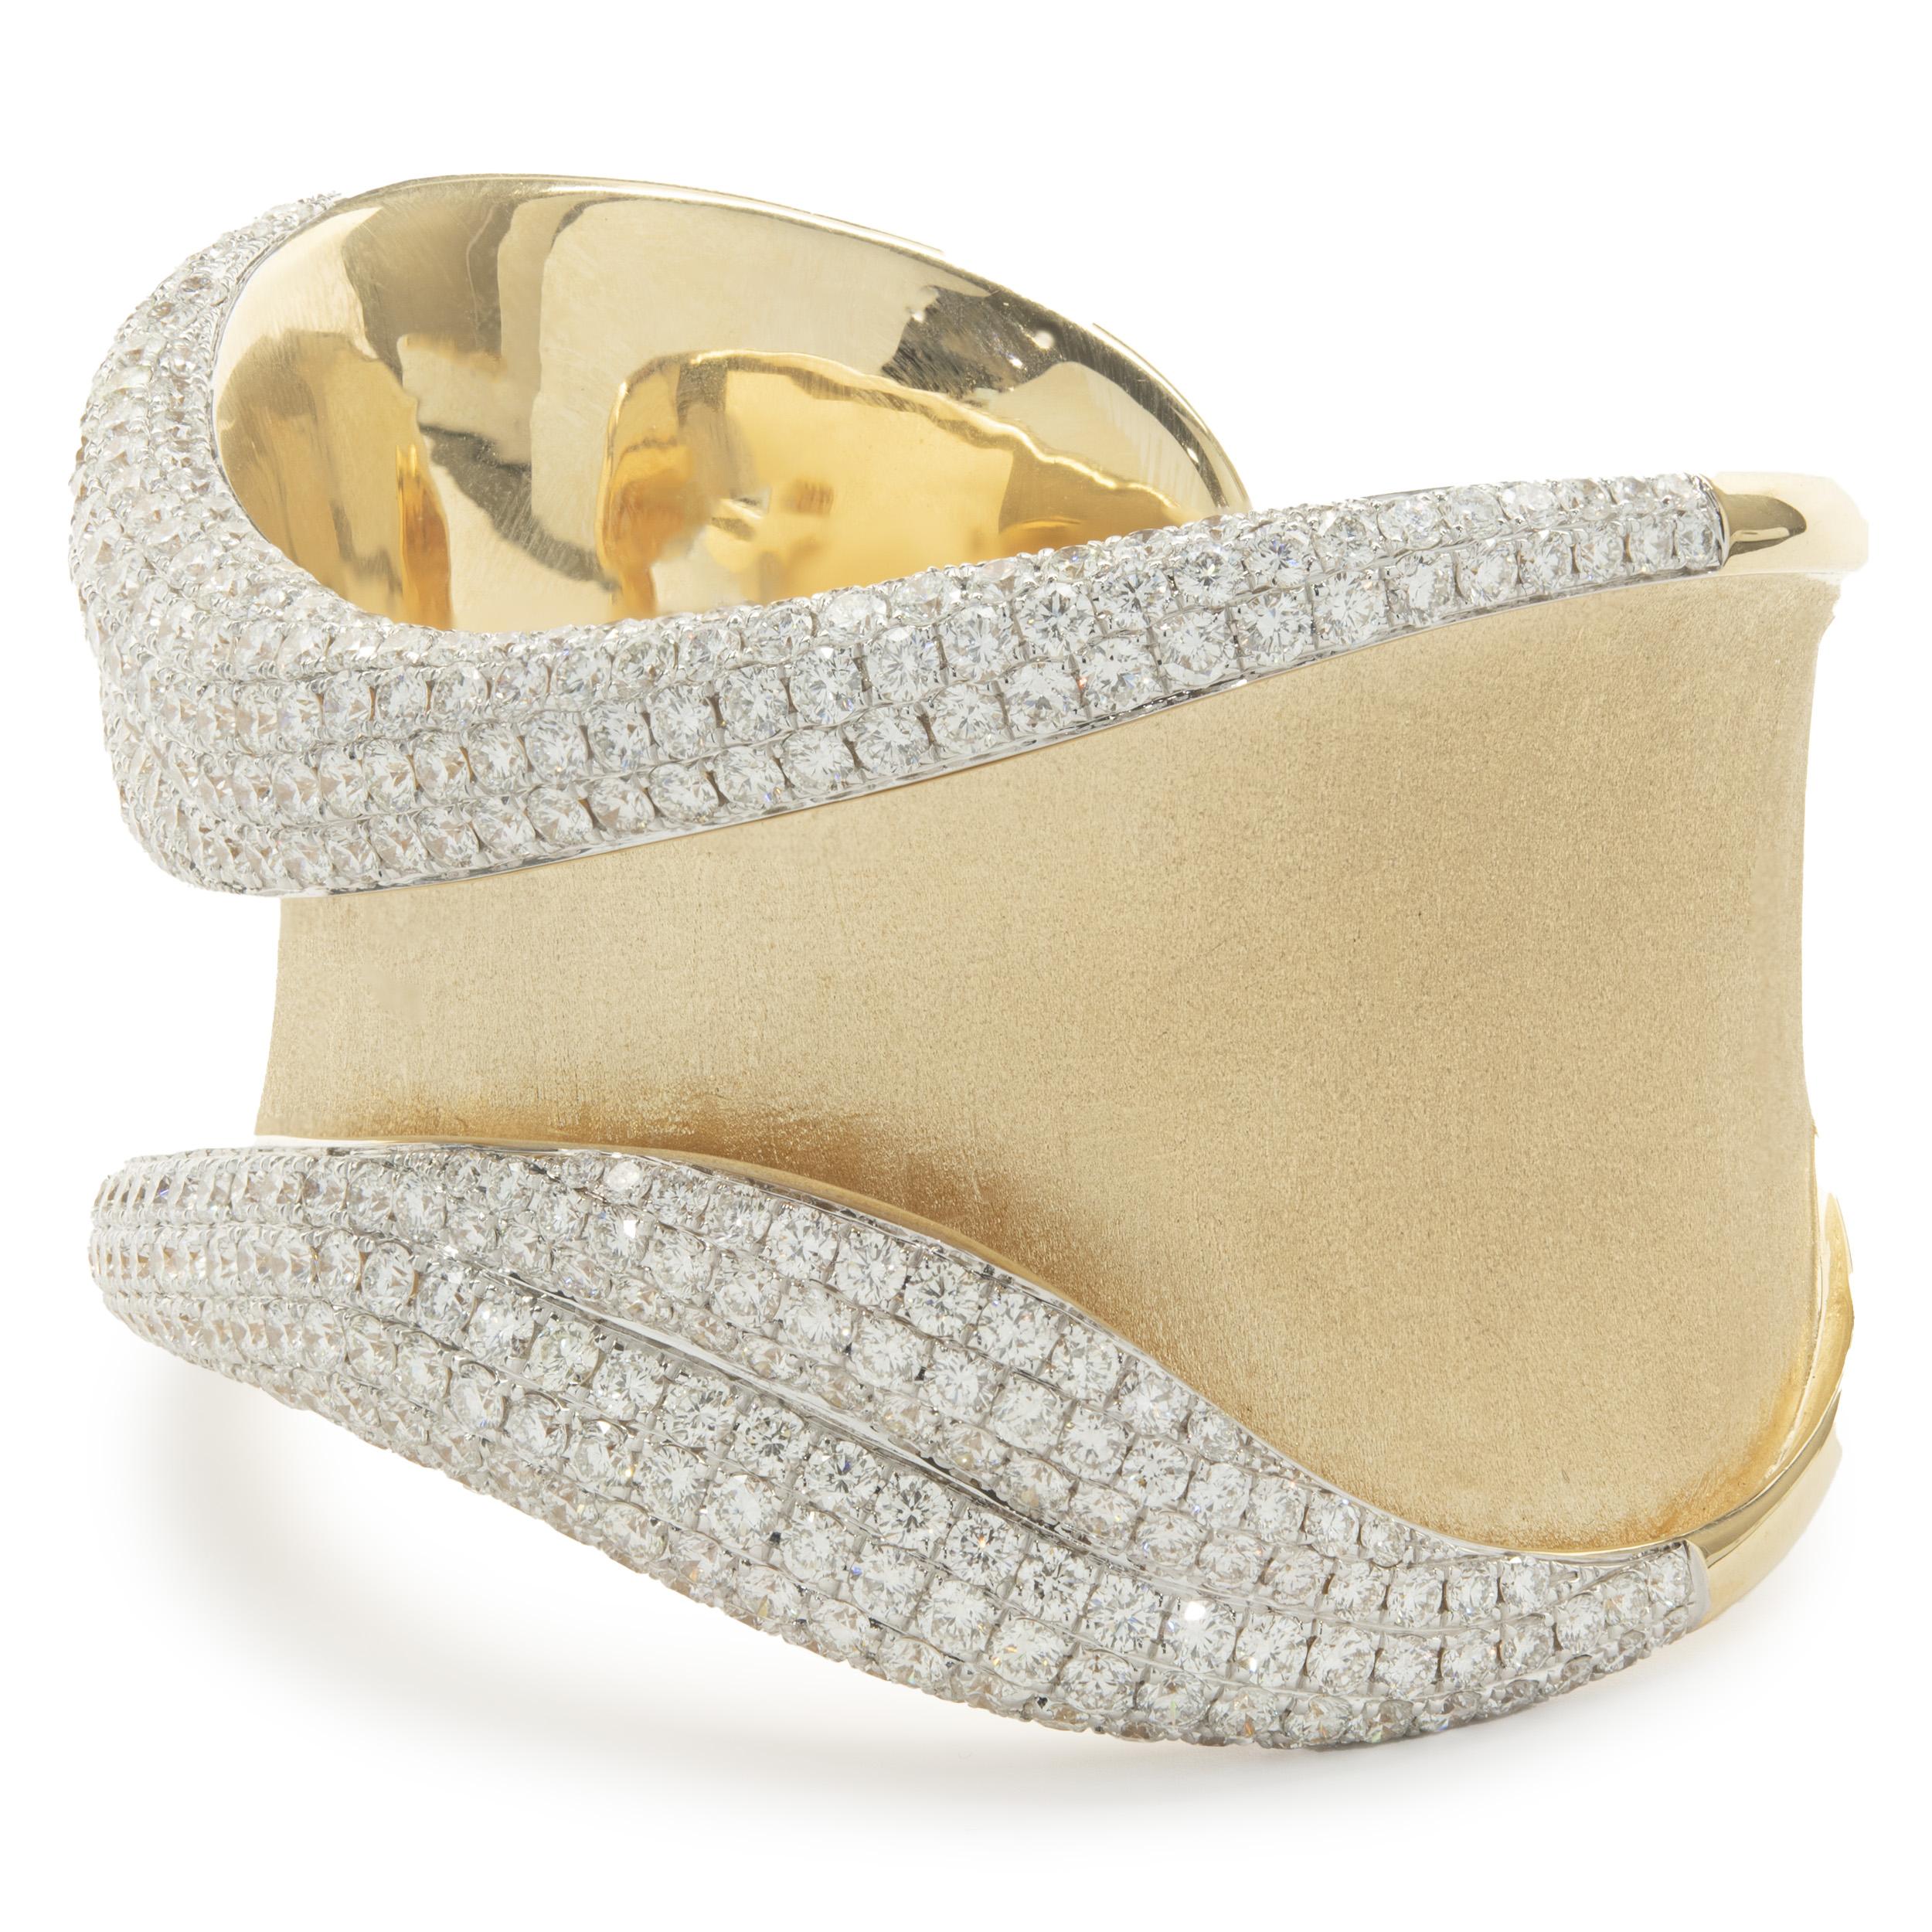 Designer: custom design
Material: 18K yellow gold
Diamonds: 422 round brilliant cut = 19.50cttw
Color: G
Clarity: VS1-2
Dimensions: bracelet will fit up to a 7-inch wrist
Weight: 109.64 grams
